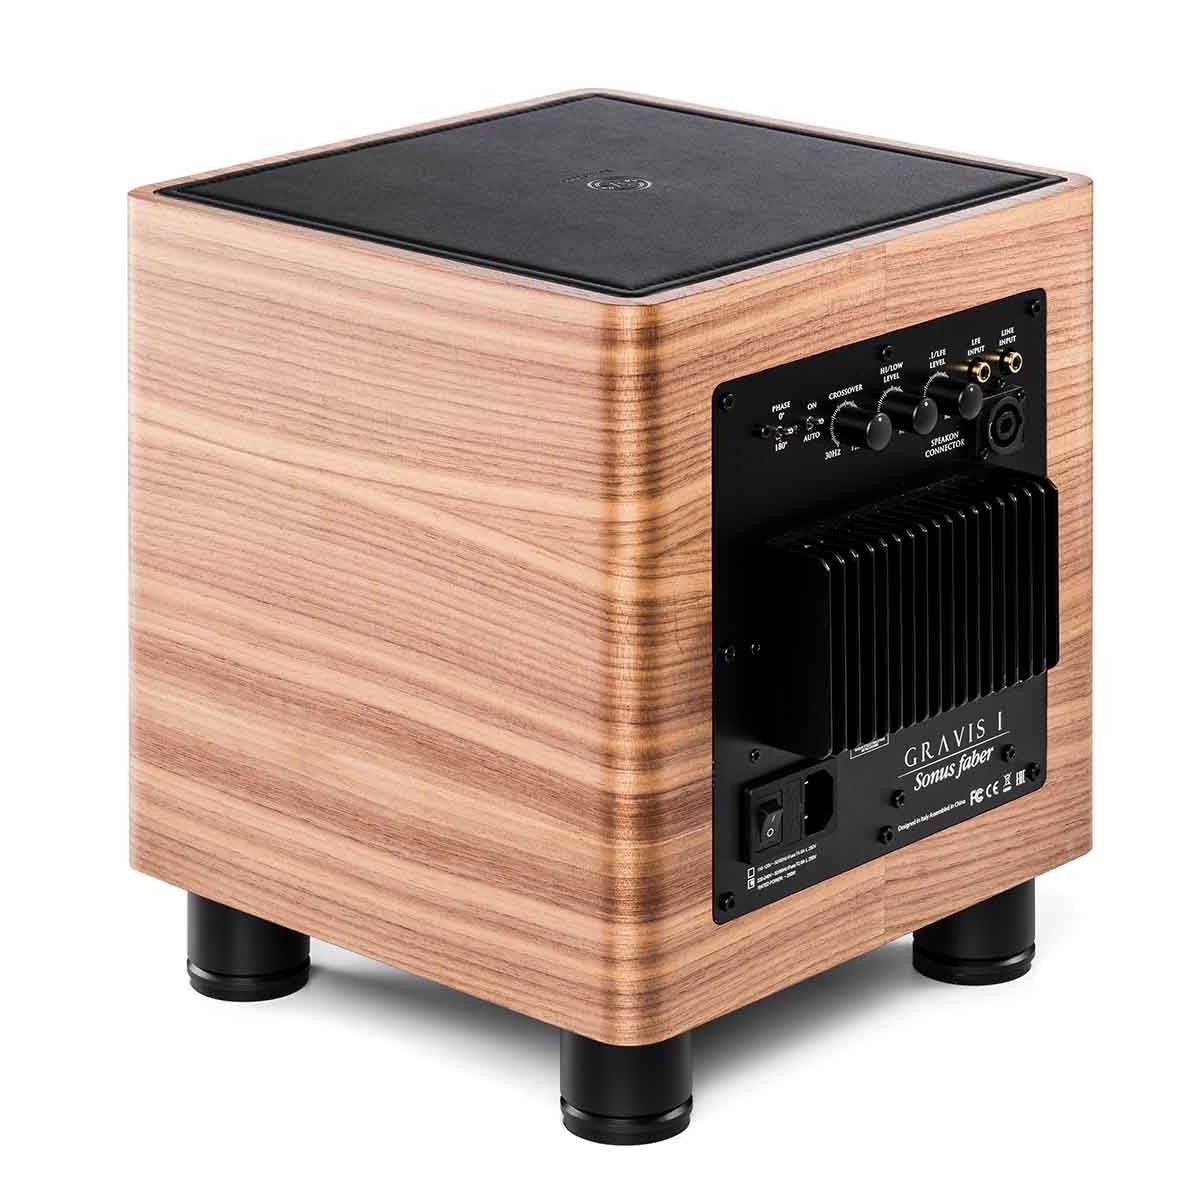 Sonus Faber Gravis I 8" Powered Subwoofer wood angled rear view